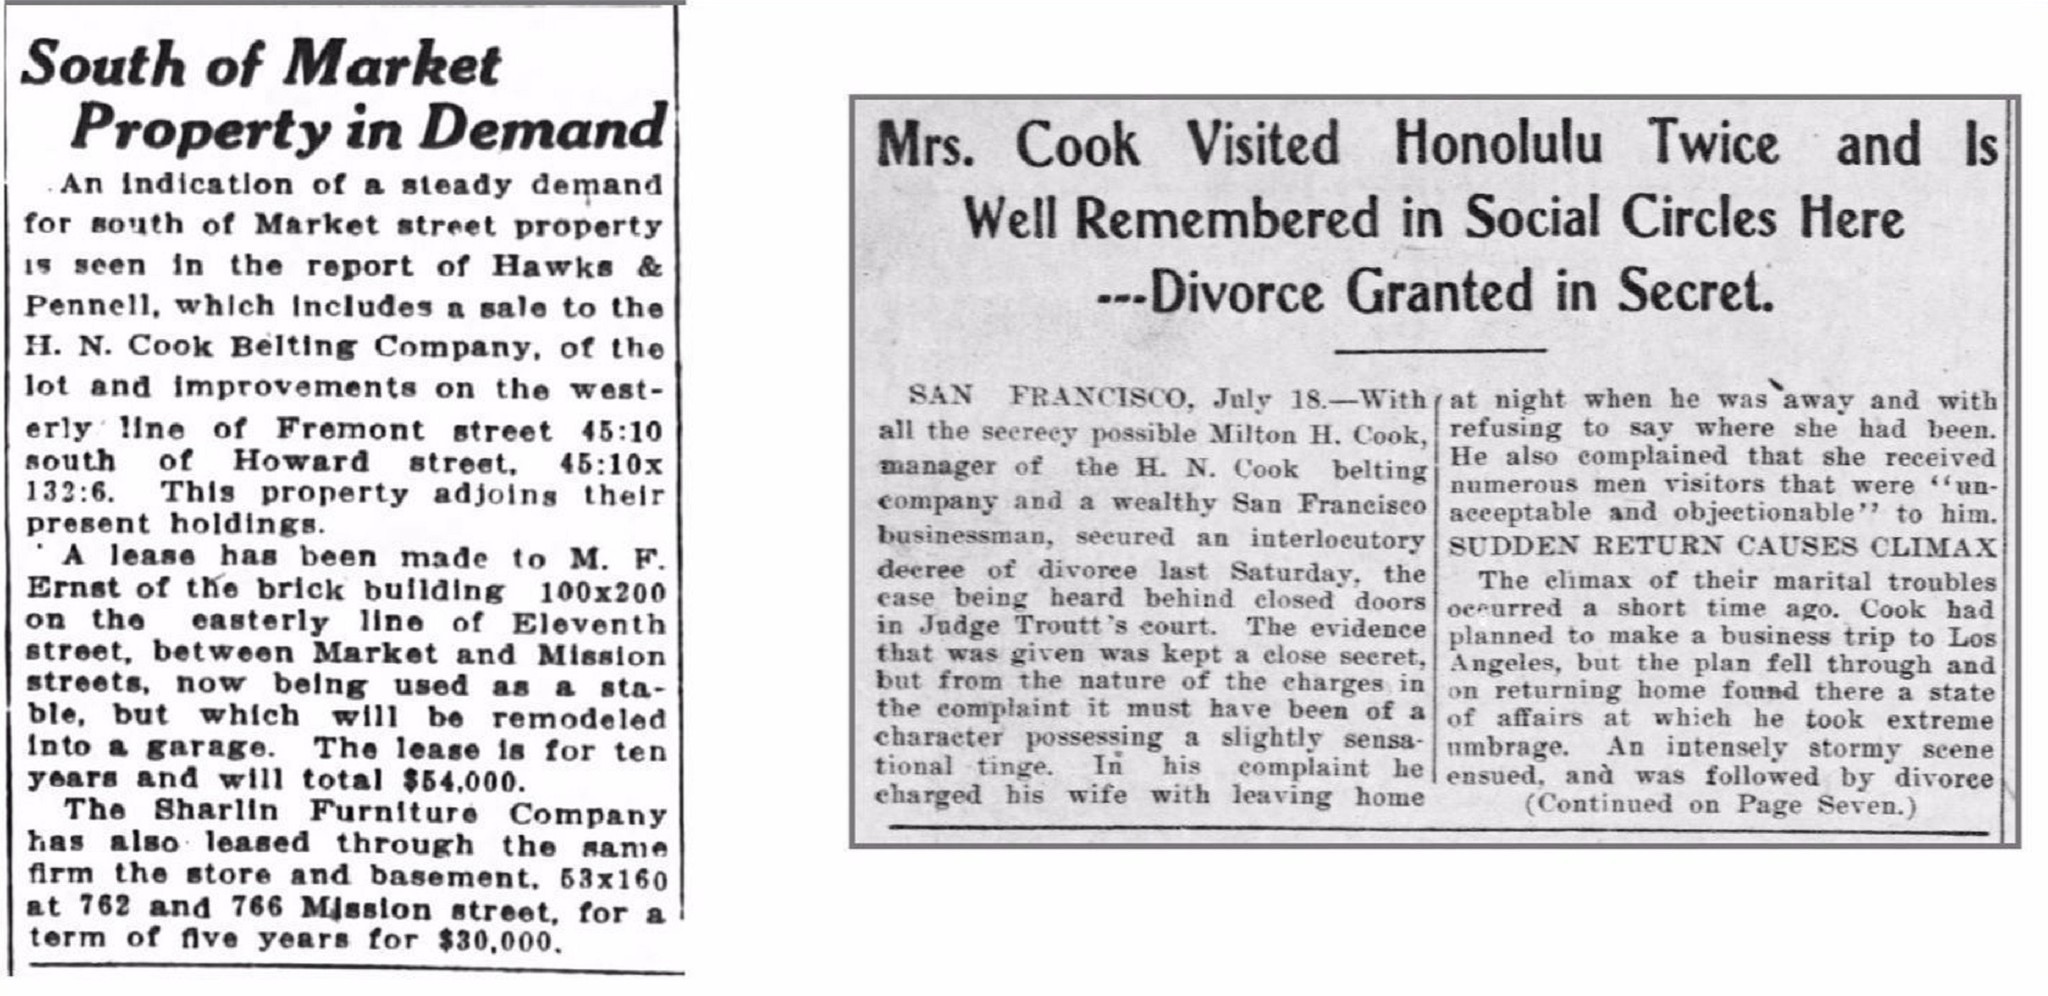 Reports detail news about the Cook family in the San Francisco Chronicle and Honolulu Advertiser in the late 19th and early 20th centuries.